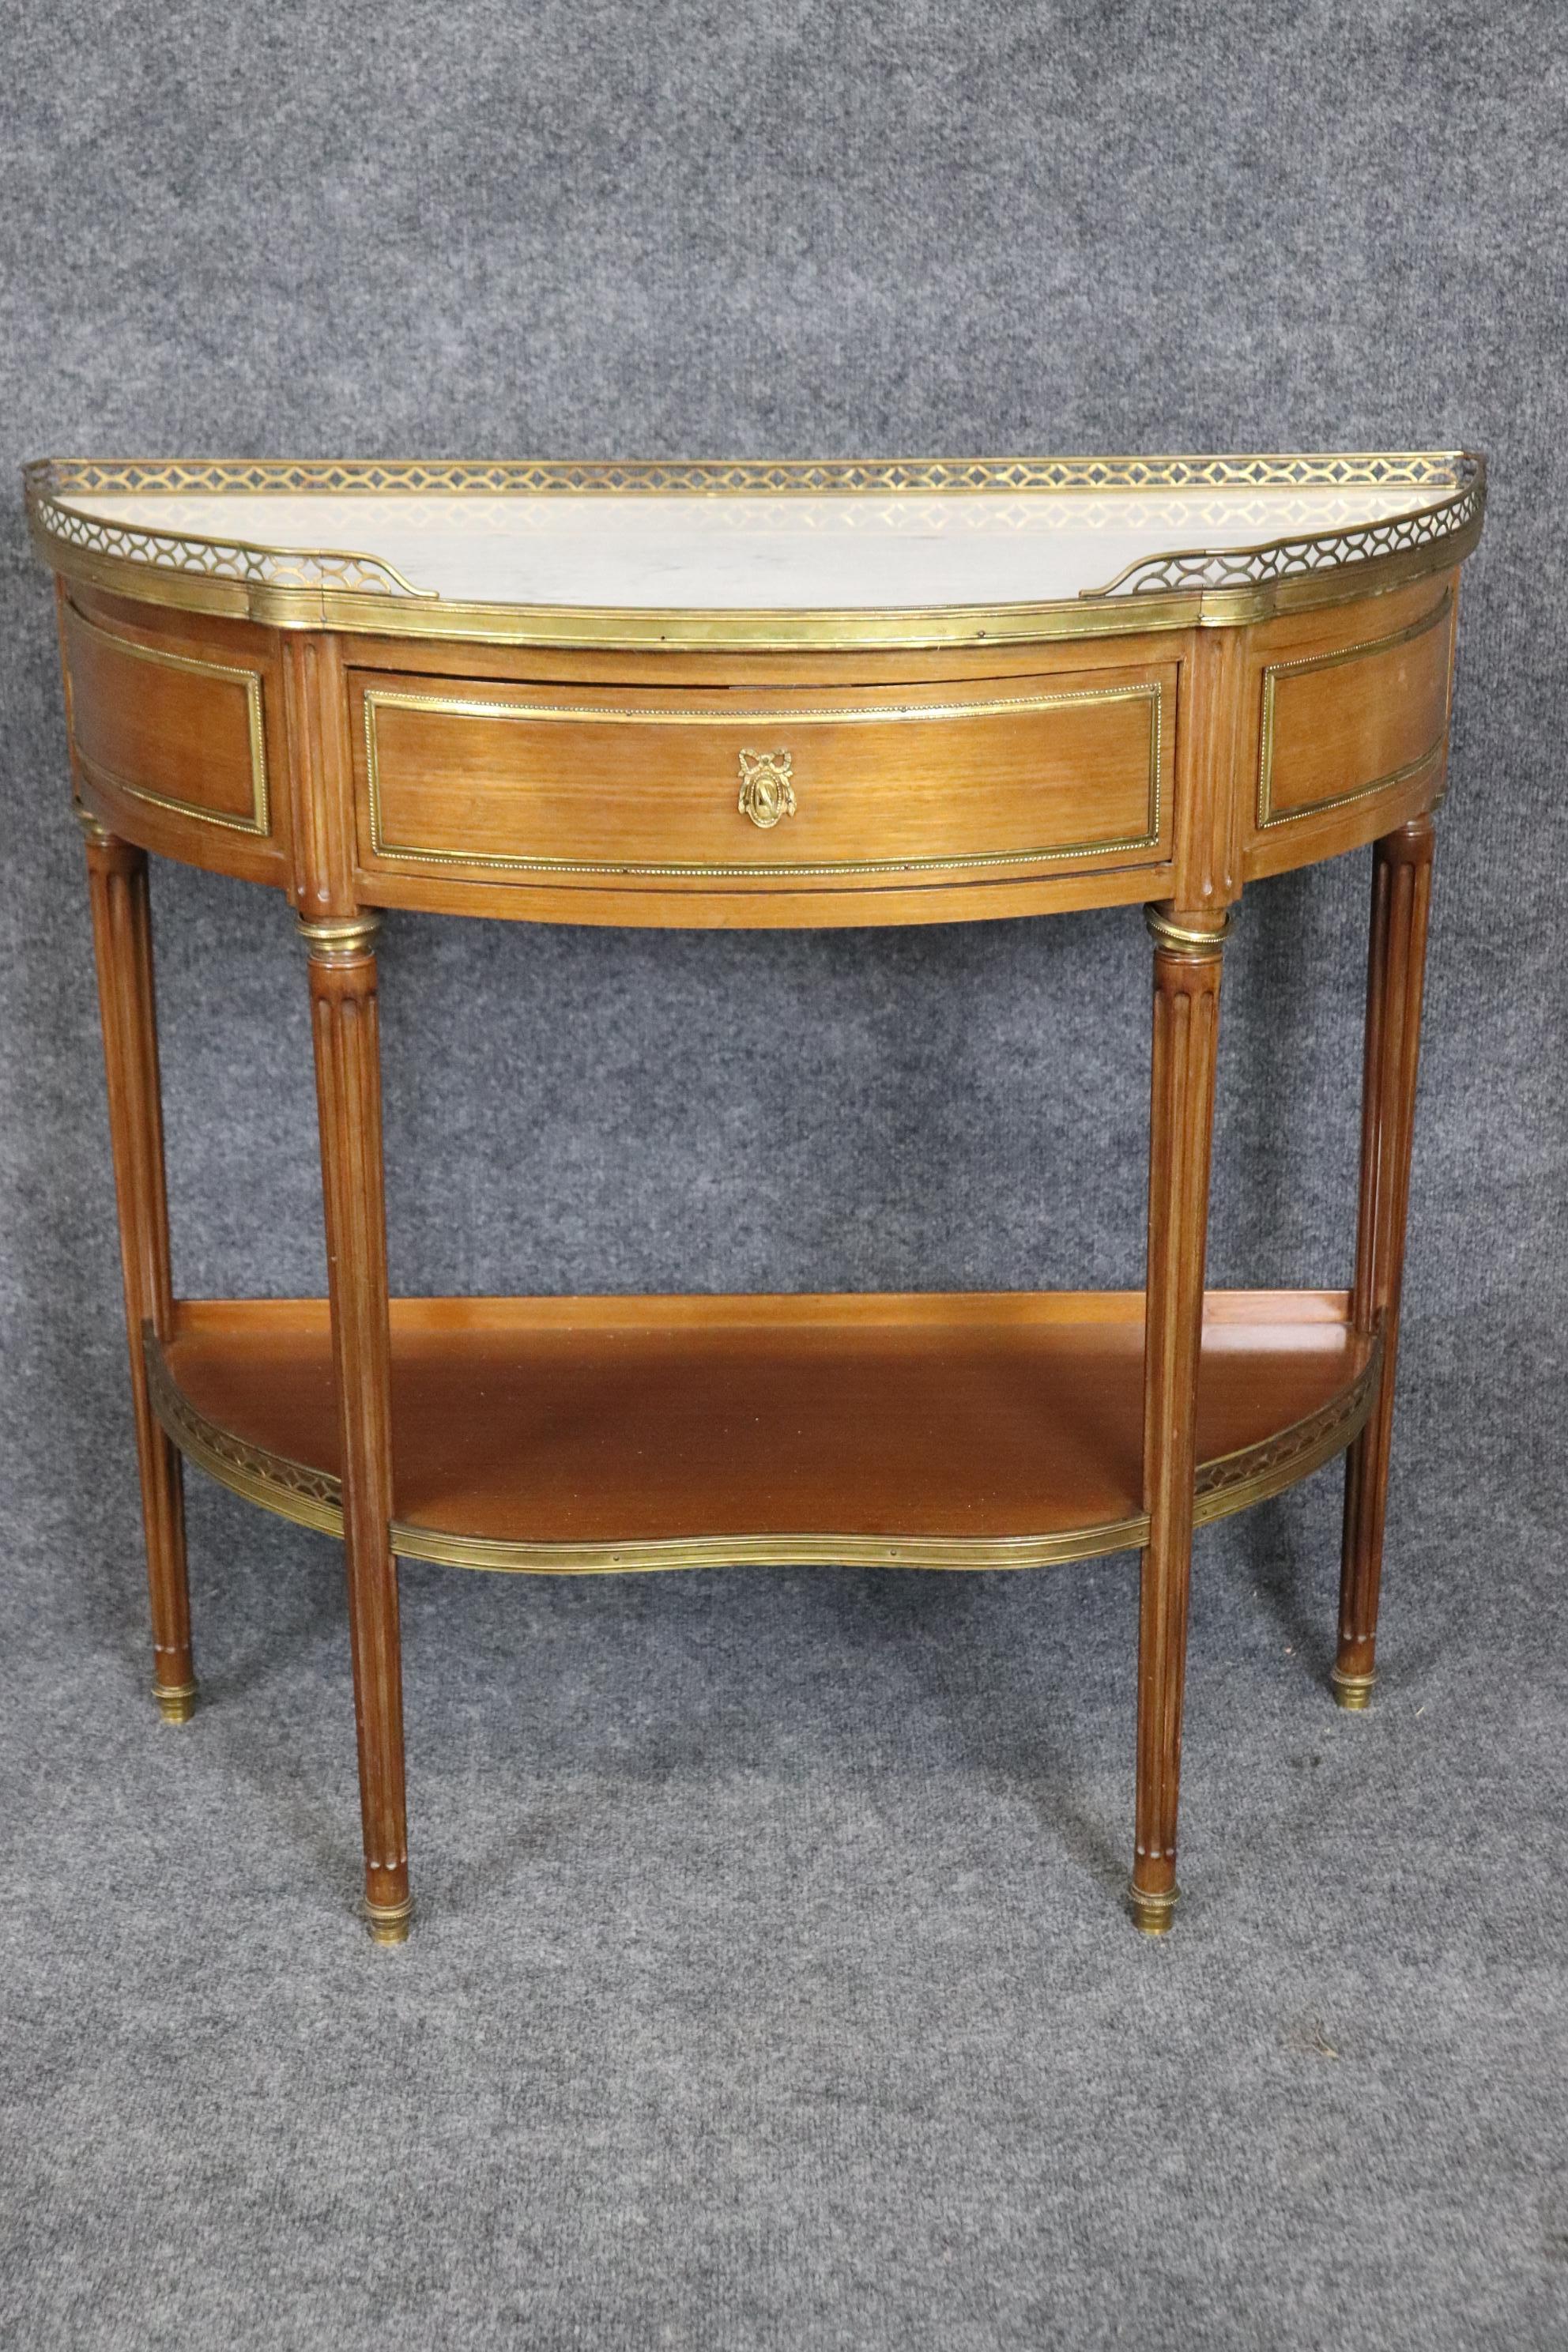  Superb Pair of Marble Top Bronze Mounted French Demilune Console Tables  For Sale 4